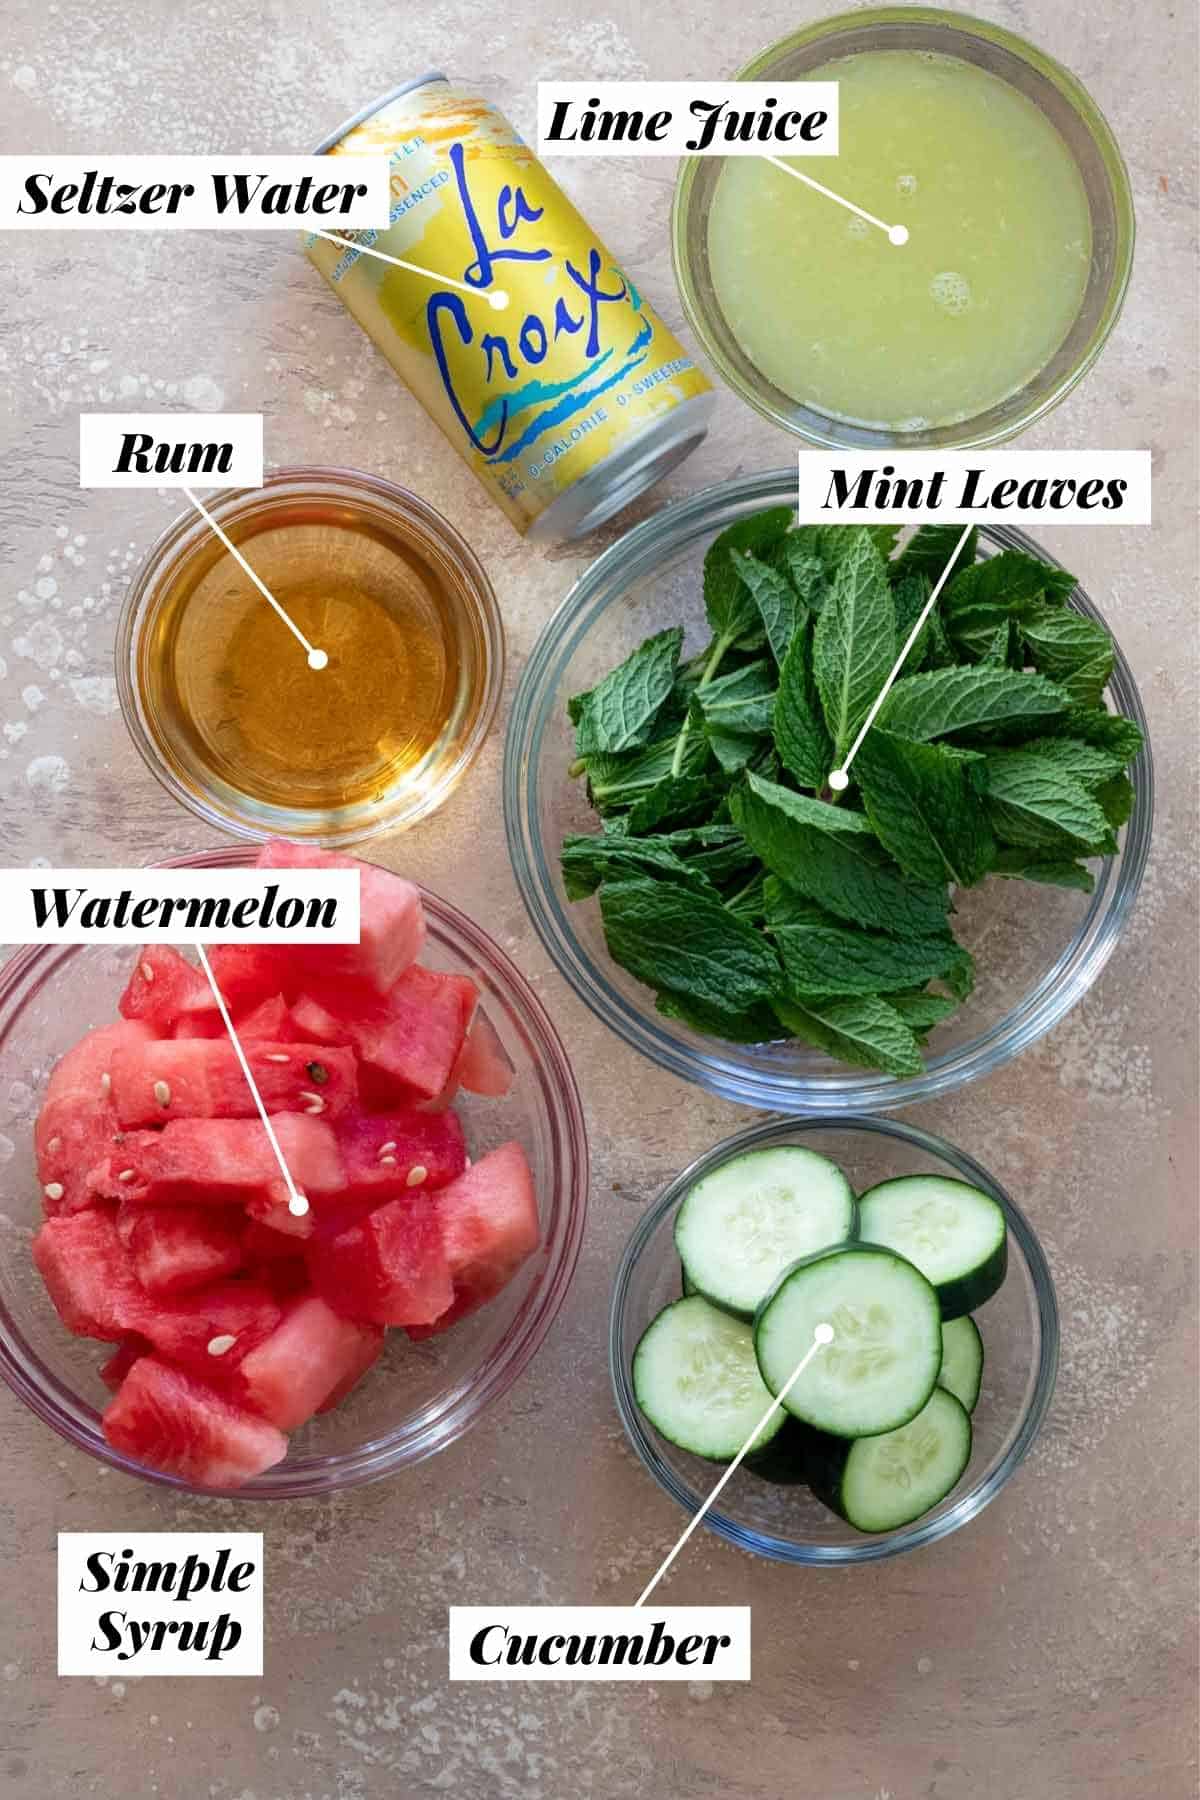 Ingredients needed to make mojito measured out into individual glass bowls and labeled. 